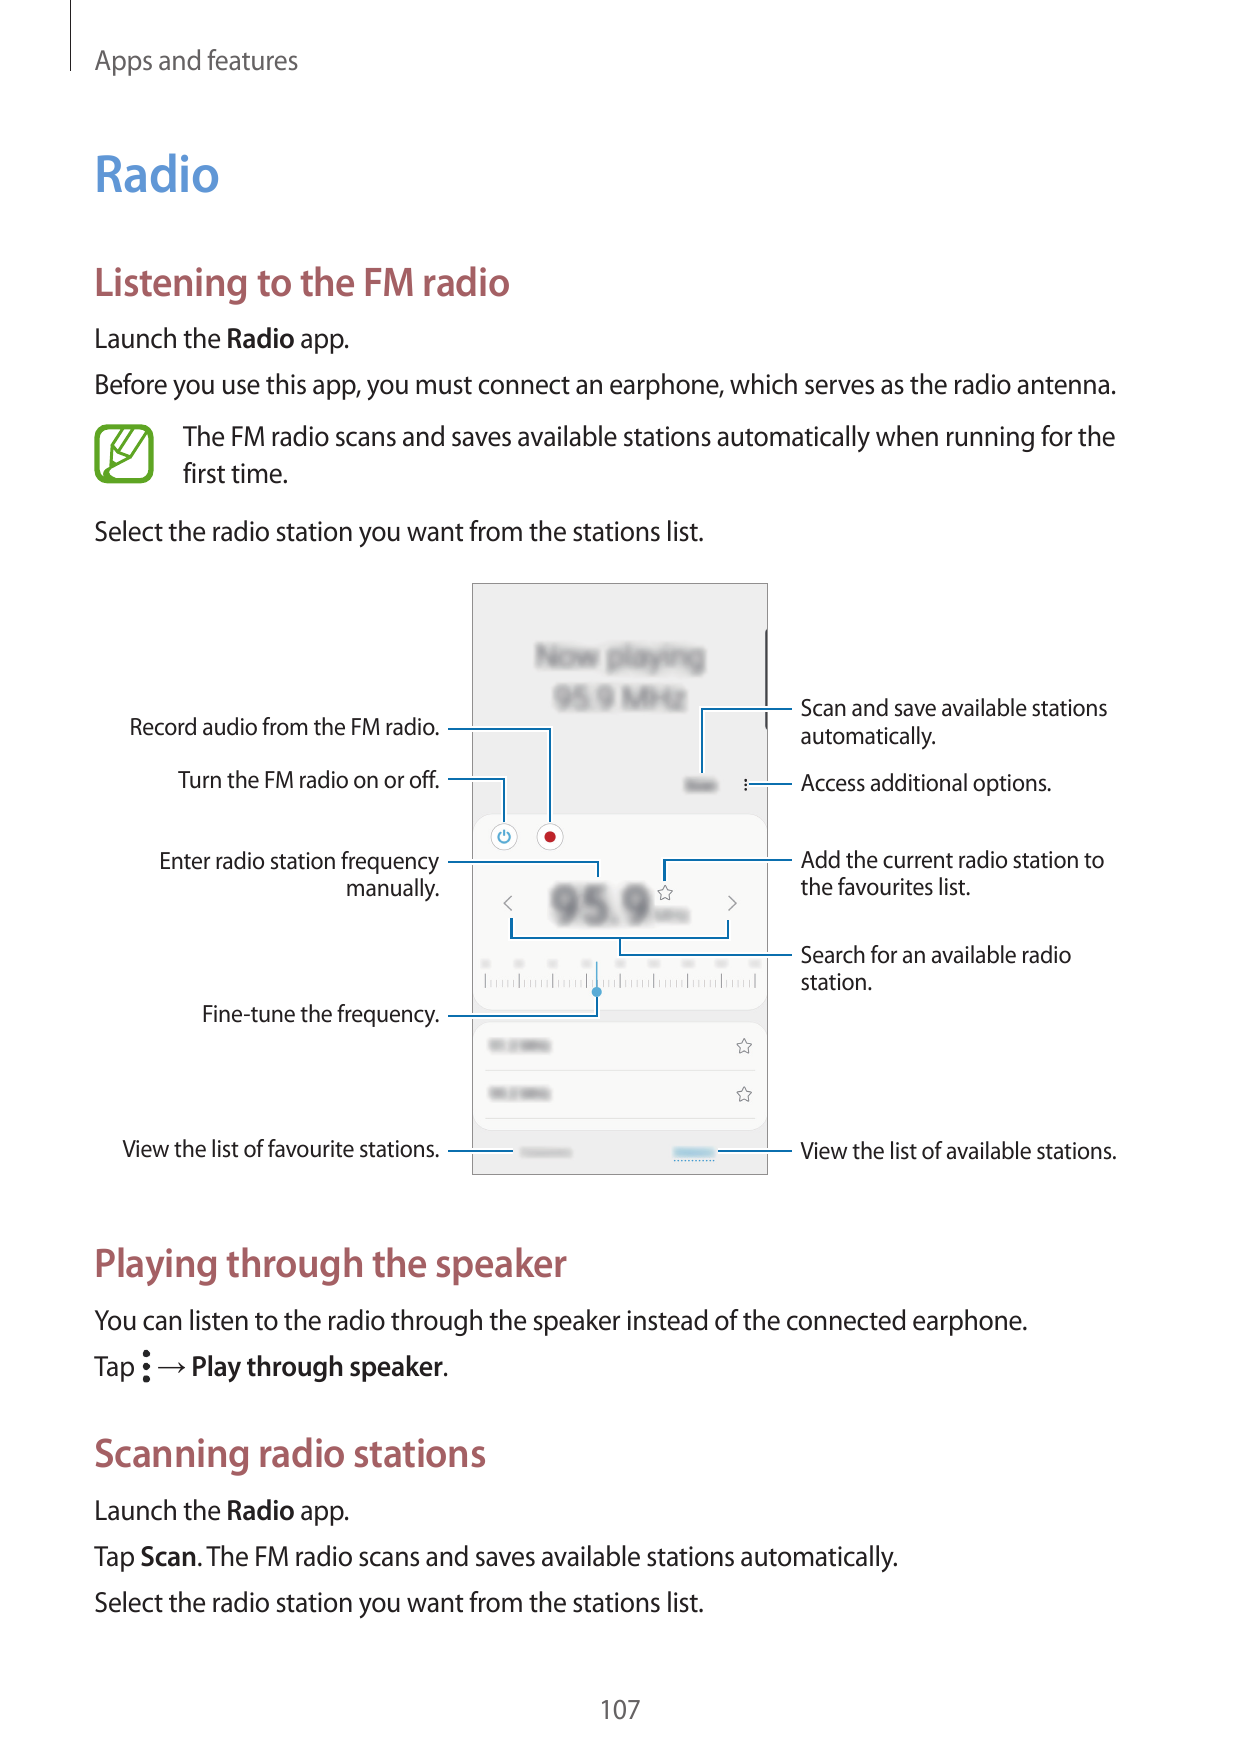 Apps and featuresRadioListening to the FM radioLaunch the Radio app.Before you use this app, you must connect an earphone, which